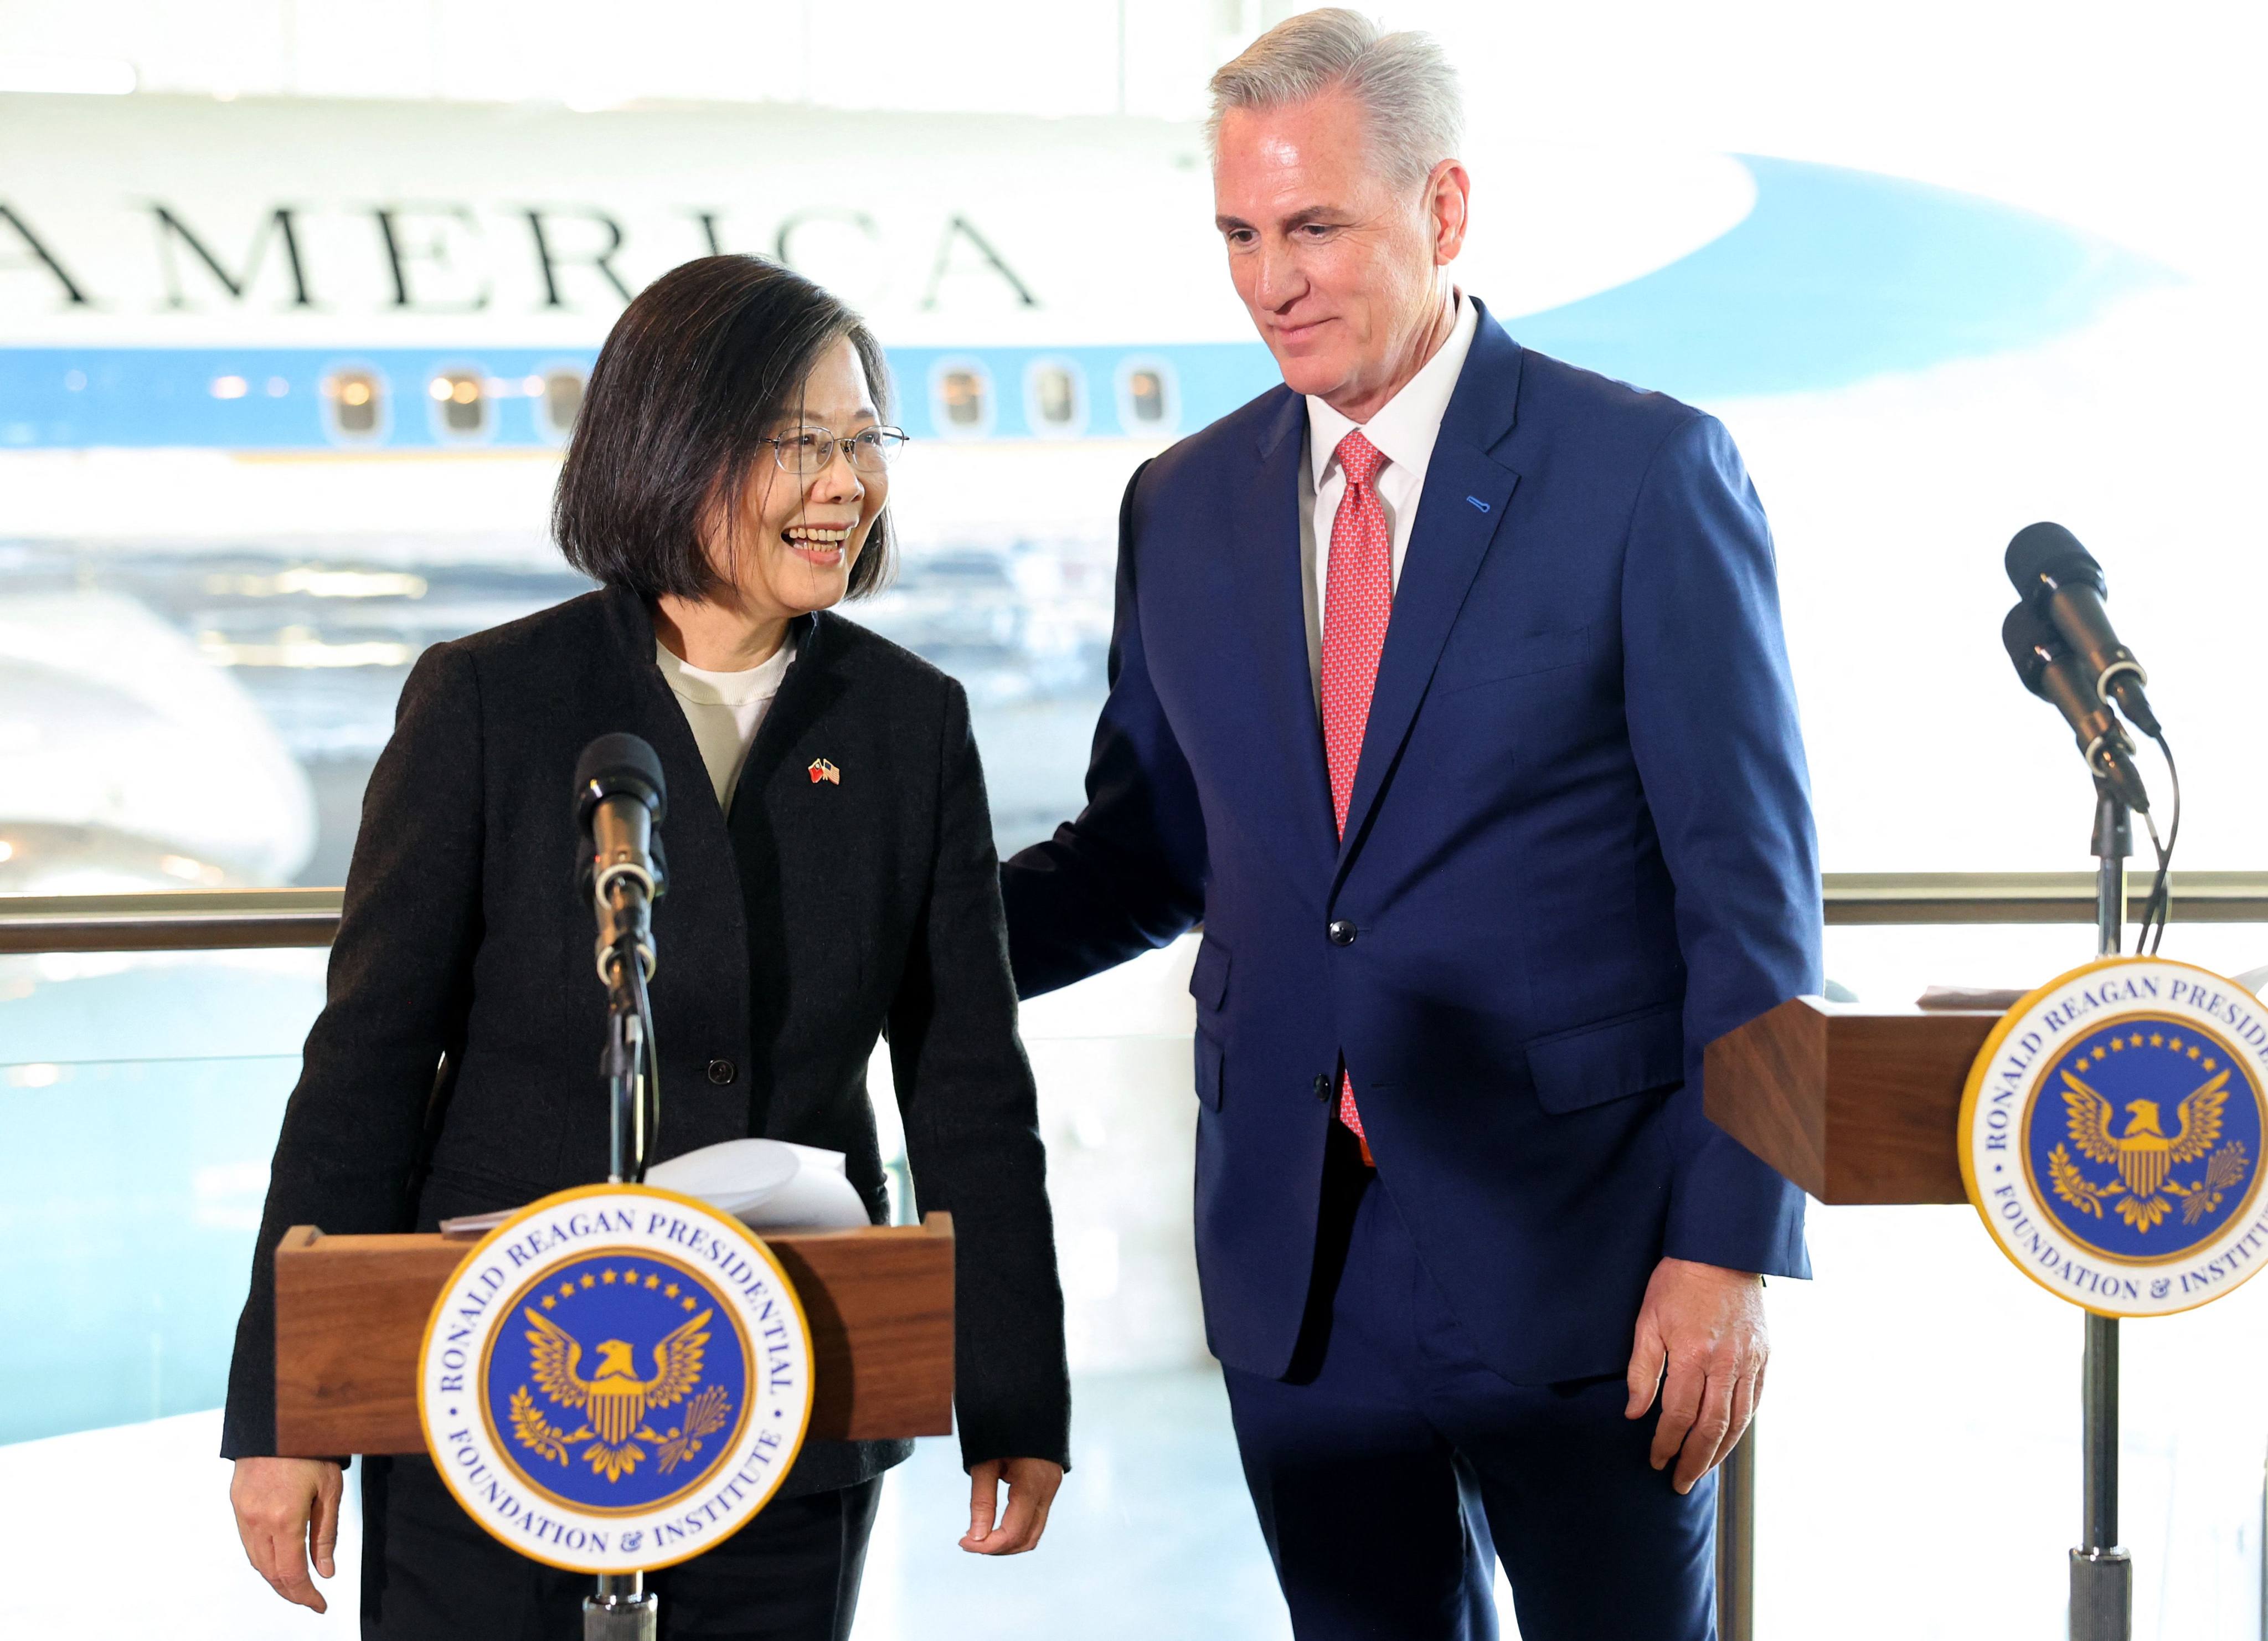 Taiwanese President Tsai Ing-wen and US Speaker of the House Kevin McCarthy stand together in the Air Force One Pavilion at the Ronald Reagan Presidential Library after making statements to the press on April 5, in Simi Valley, California. Photo: Getty Images/AFP